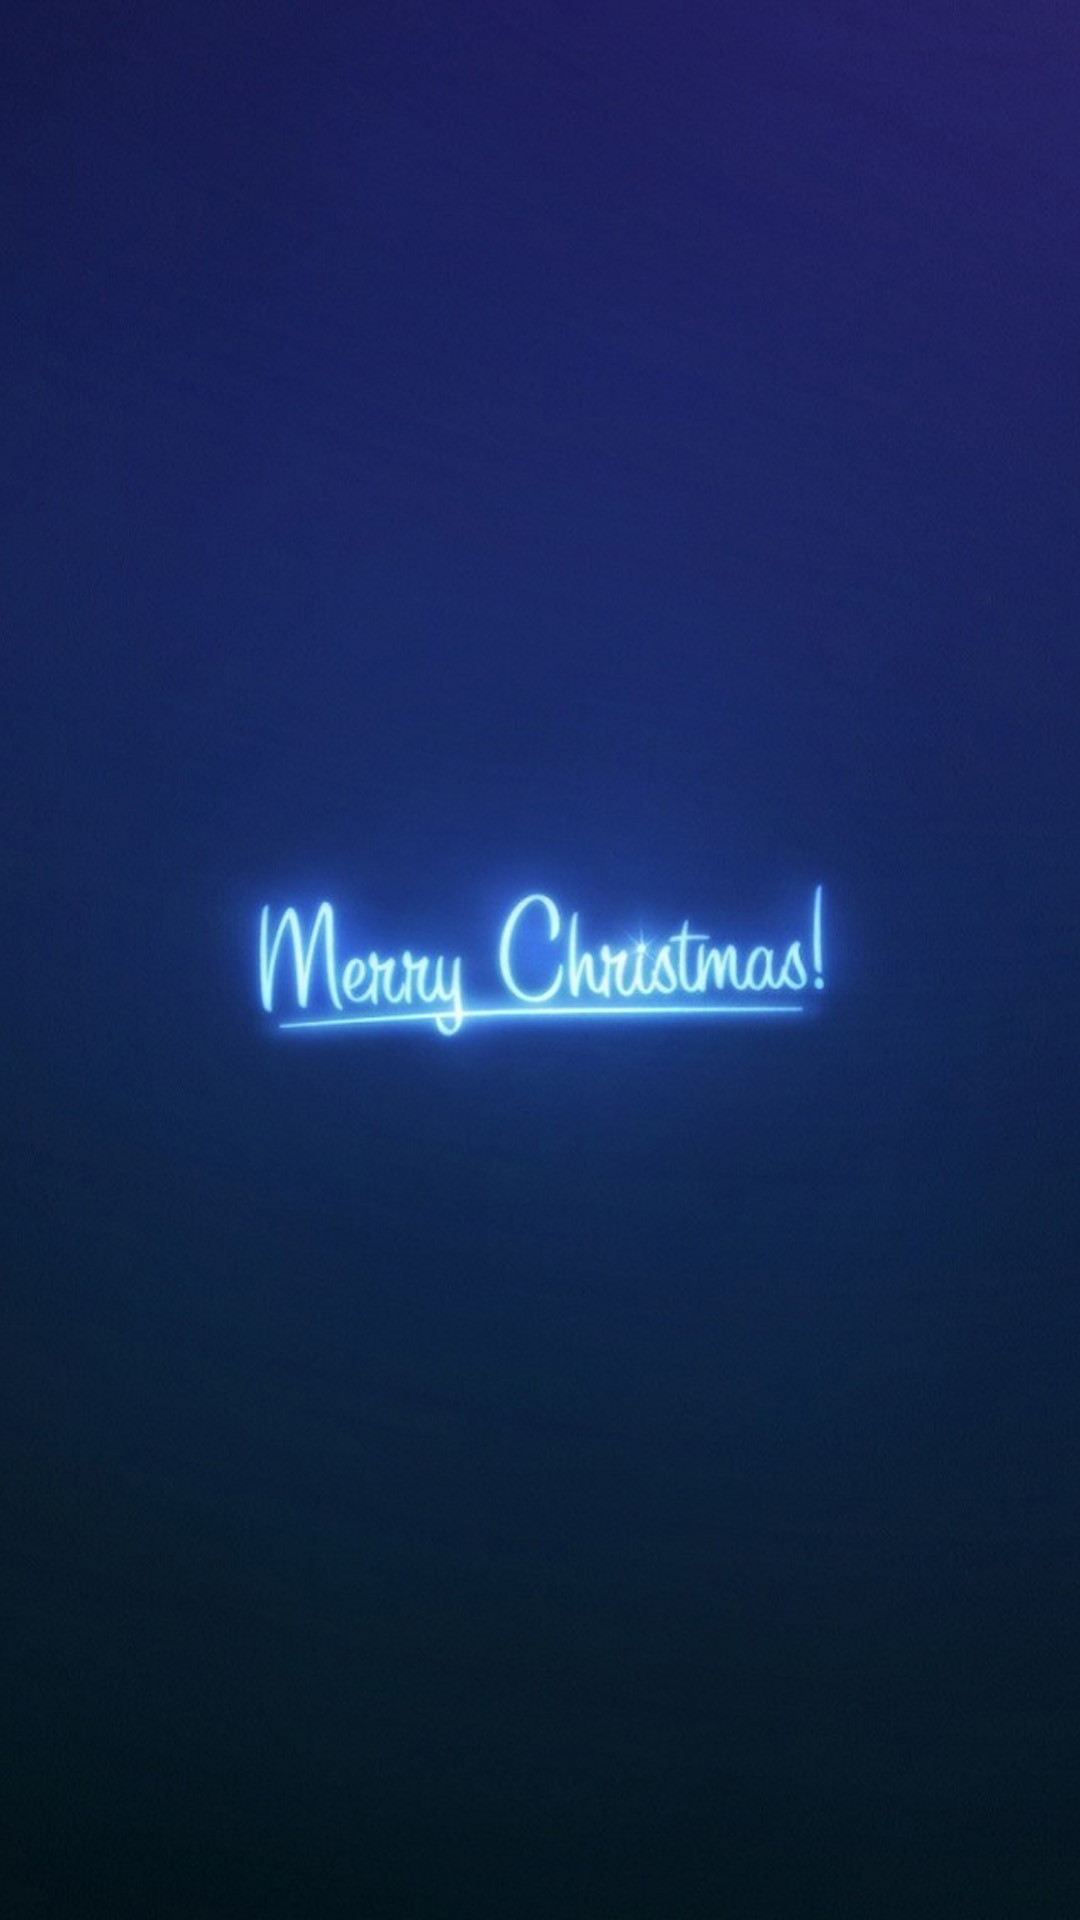 1080x1920 Merry Christmas Neon Blue Light Android Wallpaper